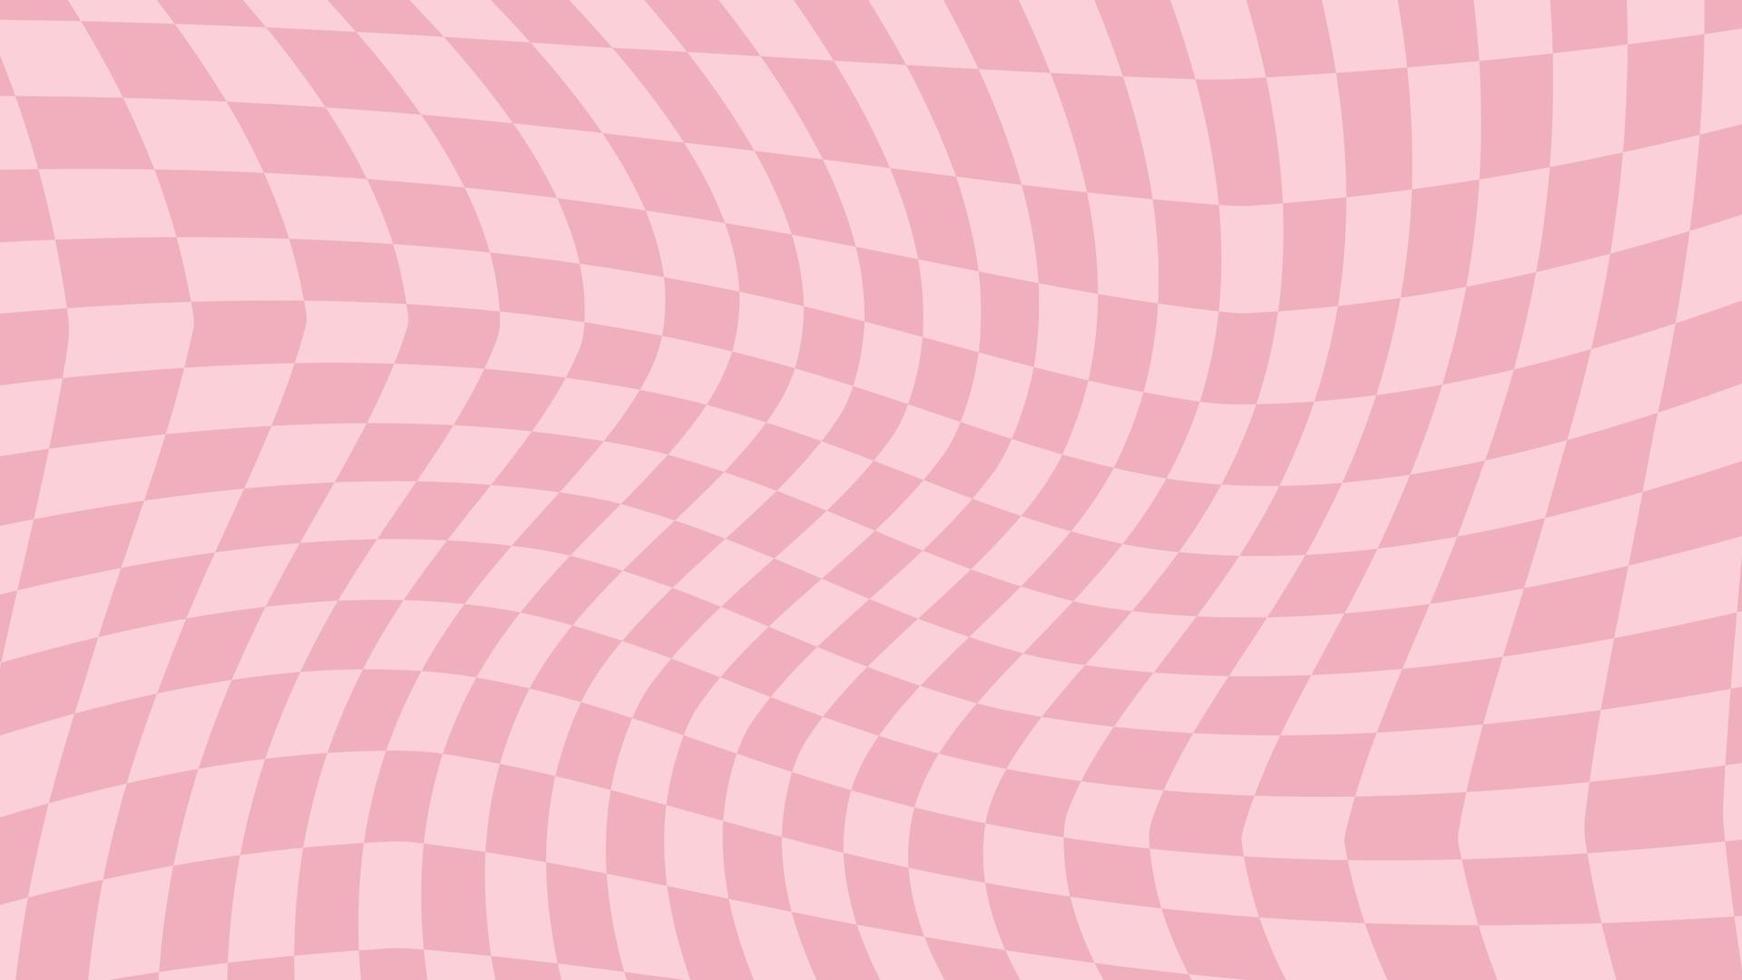 aesthetic pink checkerboard distorted checkered wallpaper illustration, perfect for wallpaper, backdrop, postcard, background